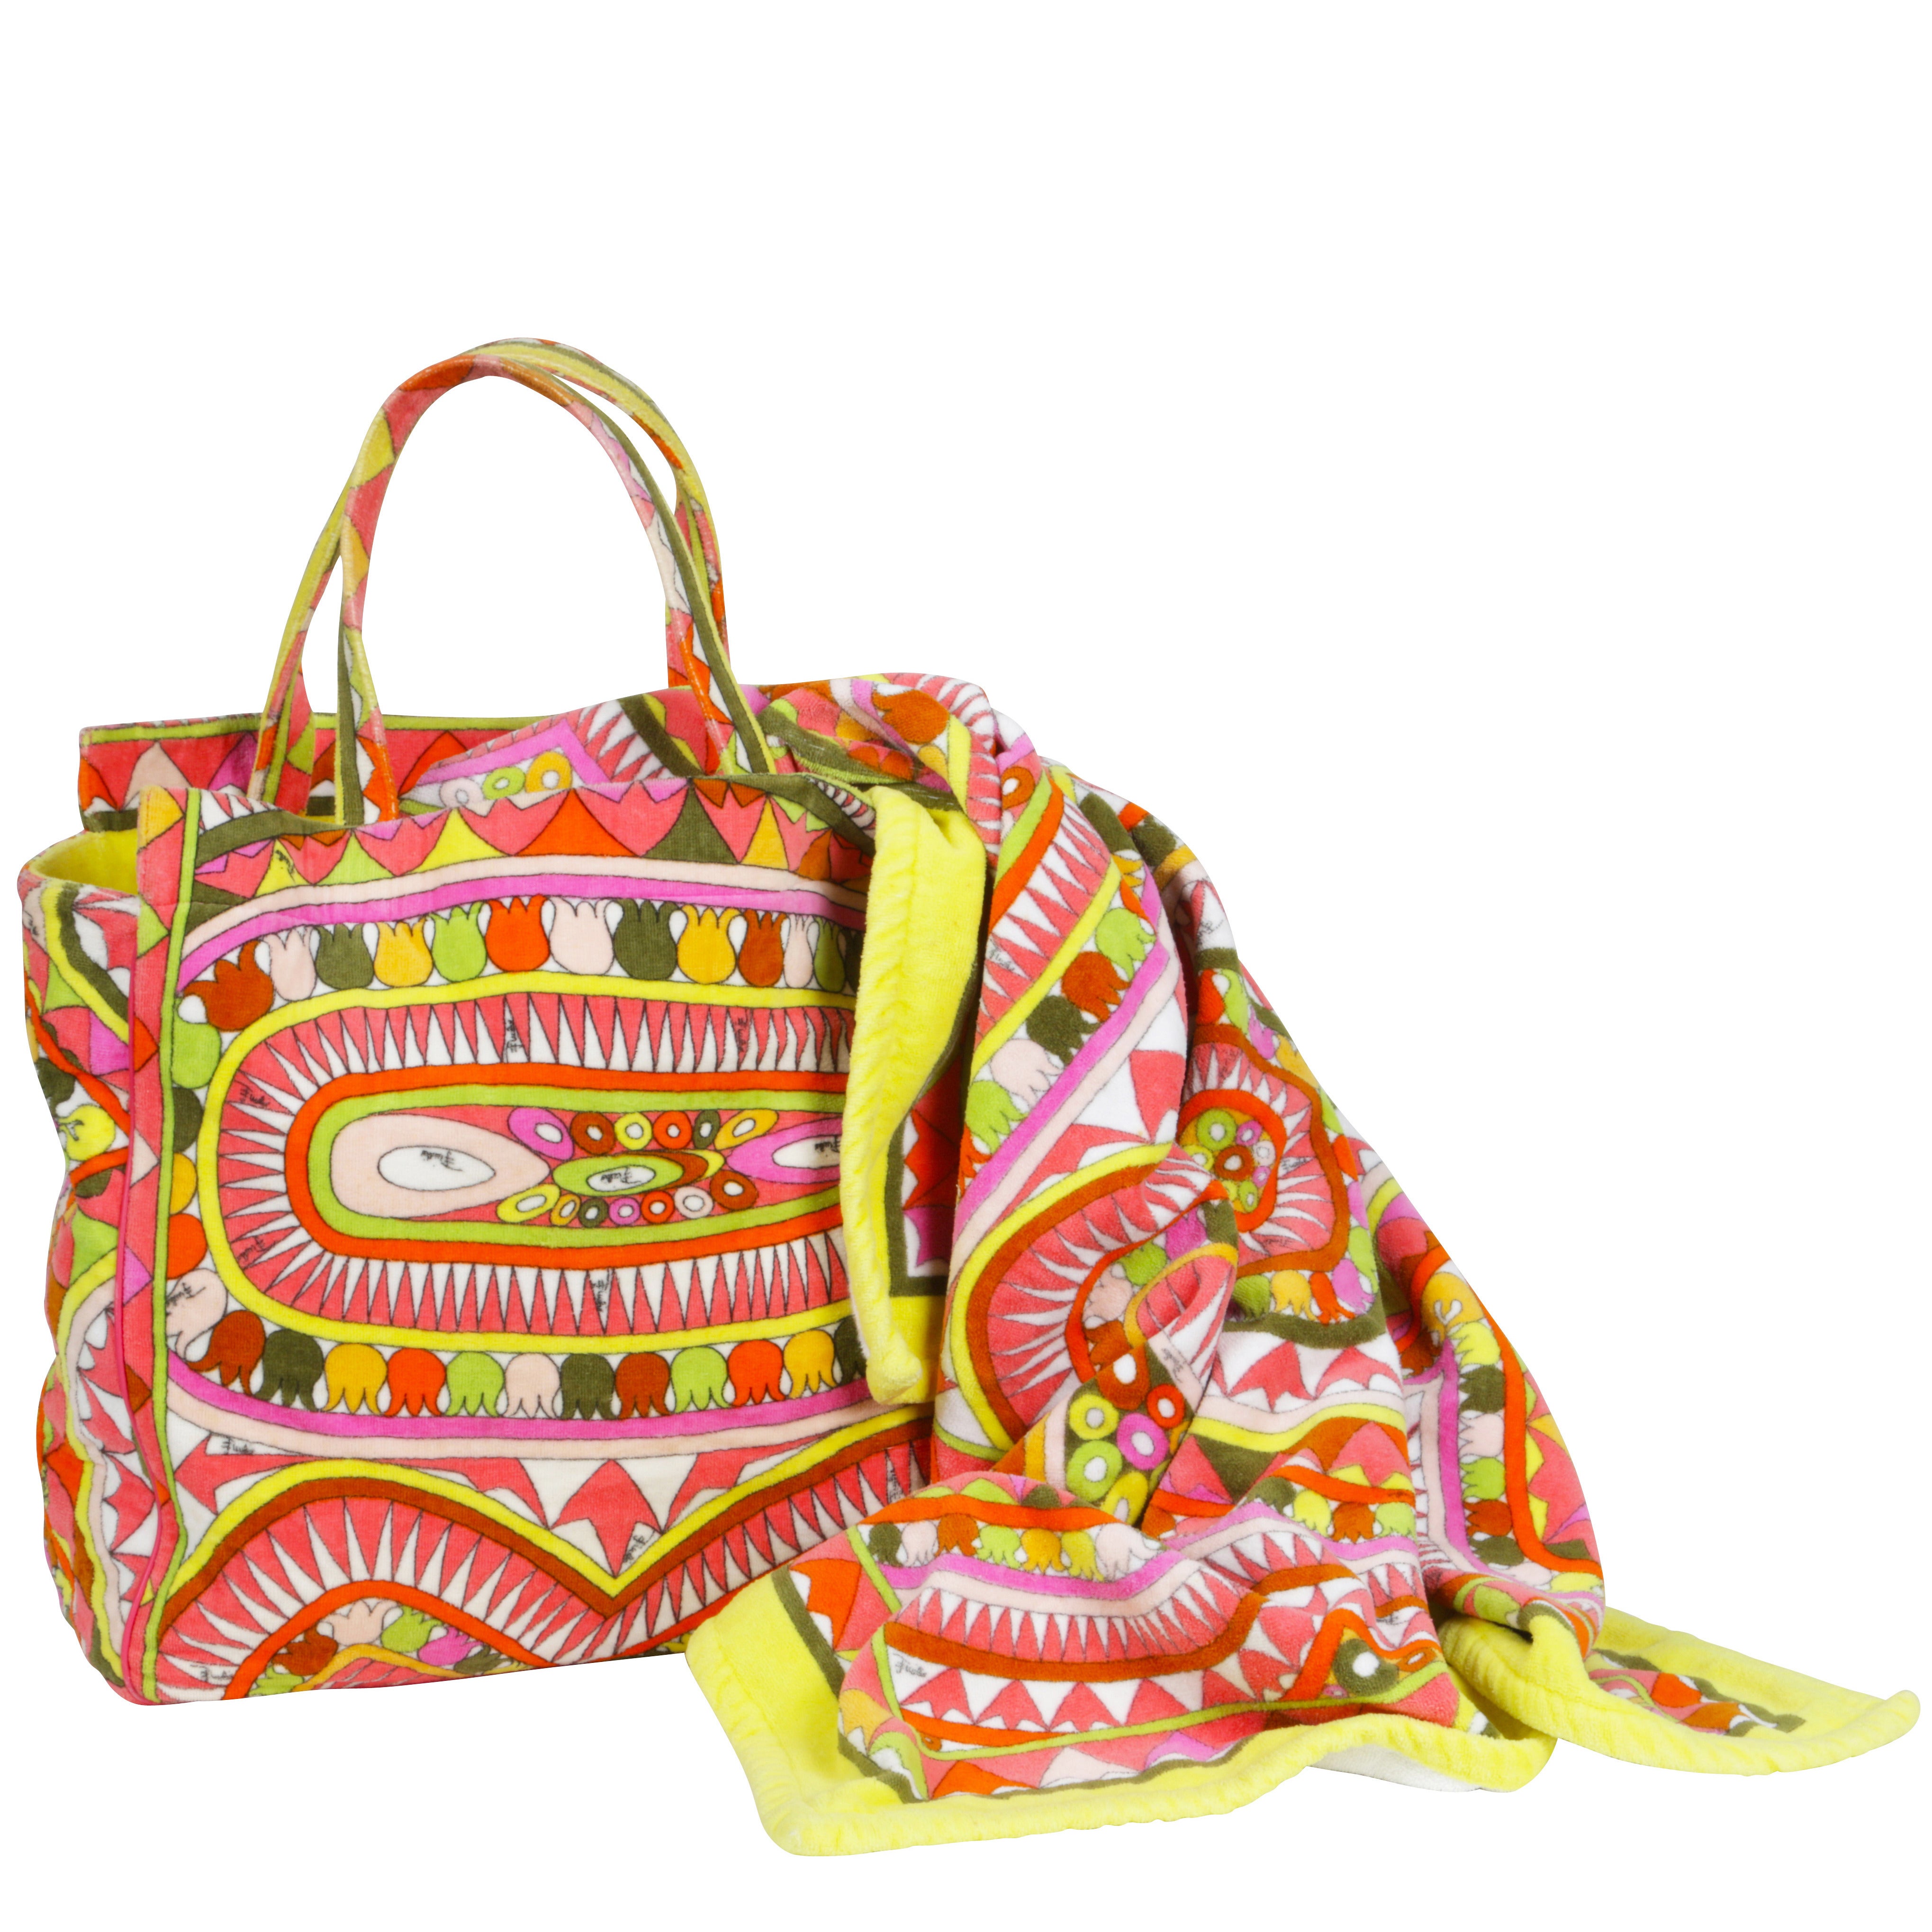 Pucci Bag and Towel Beach Set by Christian Lacroix For Sale